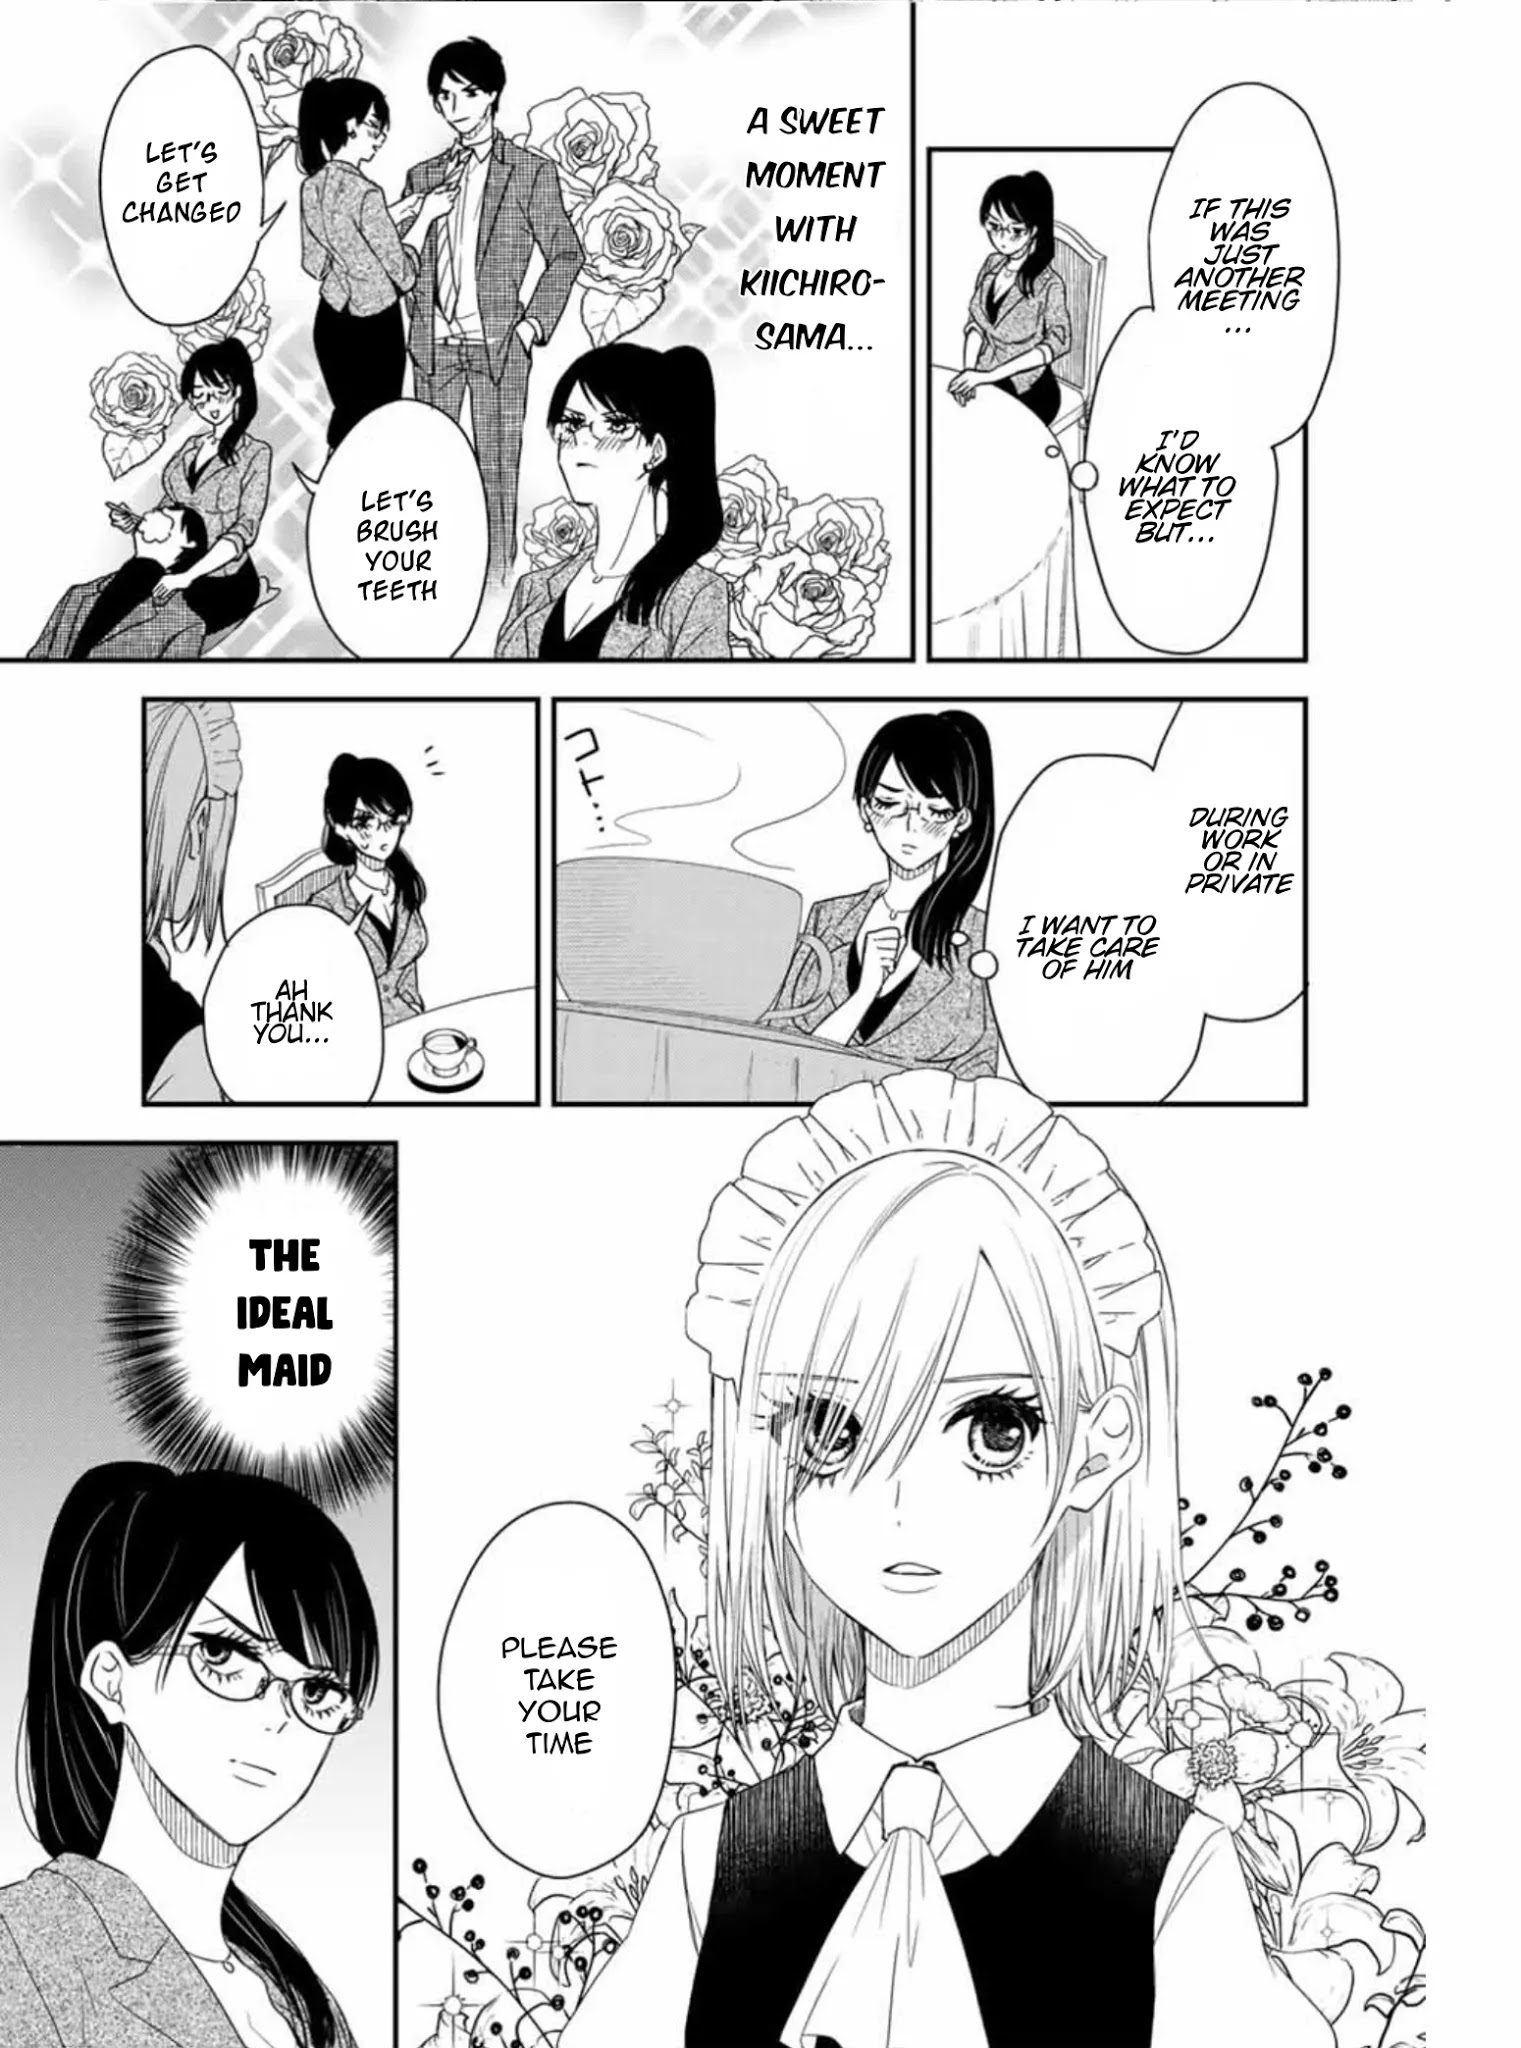 Maid No Kishi-San Chapter 18: I Want To Take Care Of You - Picture 3